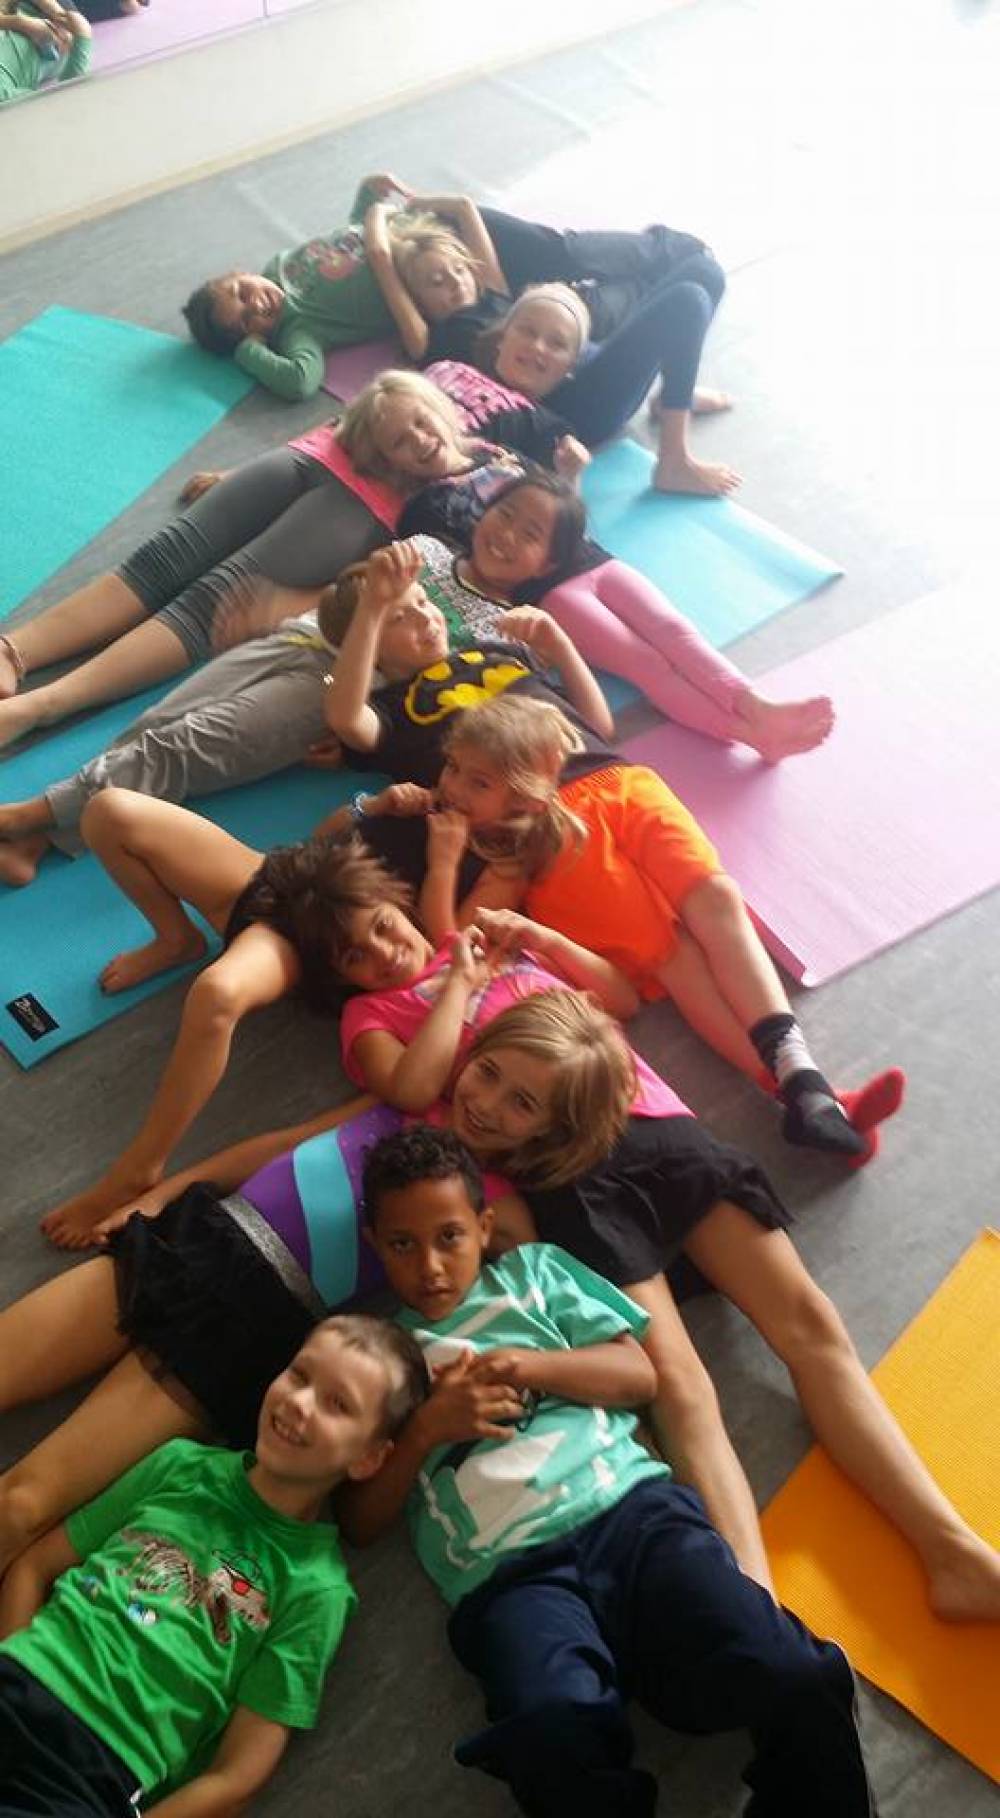 TOP MINNESOTA ART CAMP: Camp JUST DANCE at Dance-N-Magic is a Top Art Summer Camp located in St. Paul Minnesota offering many fun and enriching Art and other camp programs. 